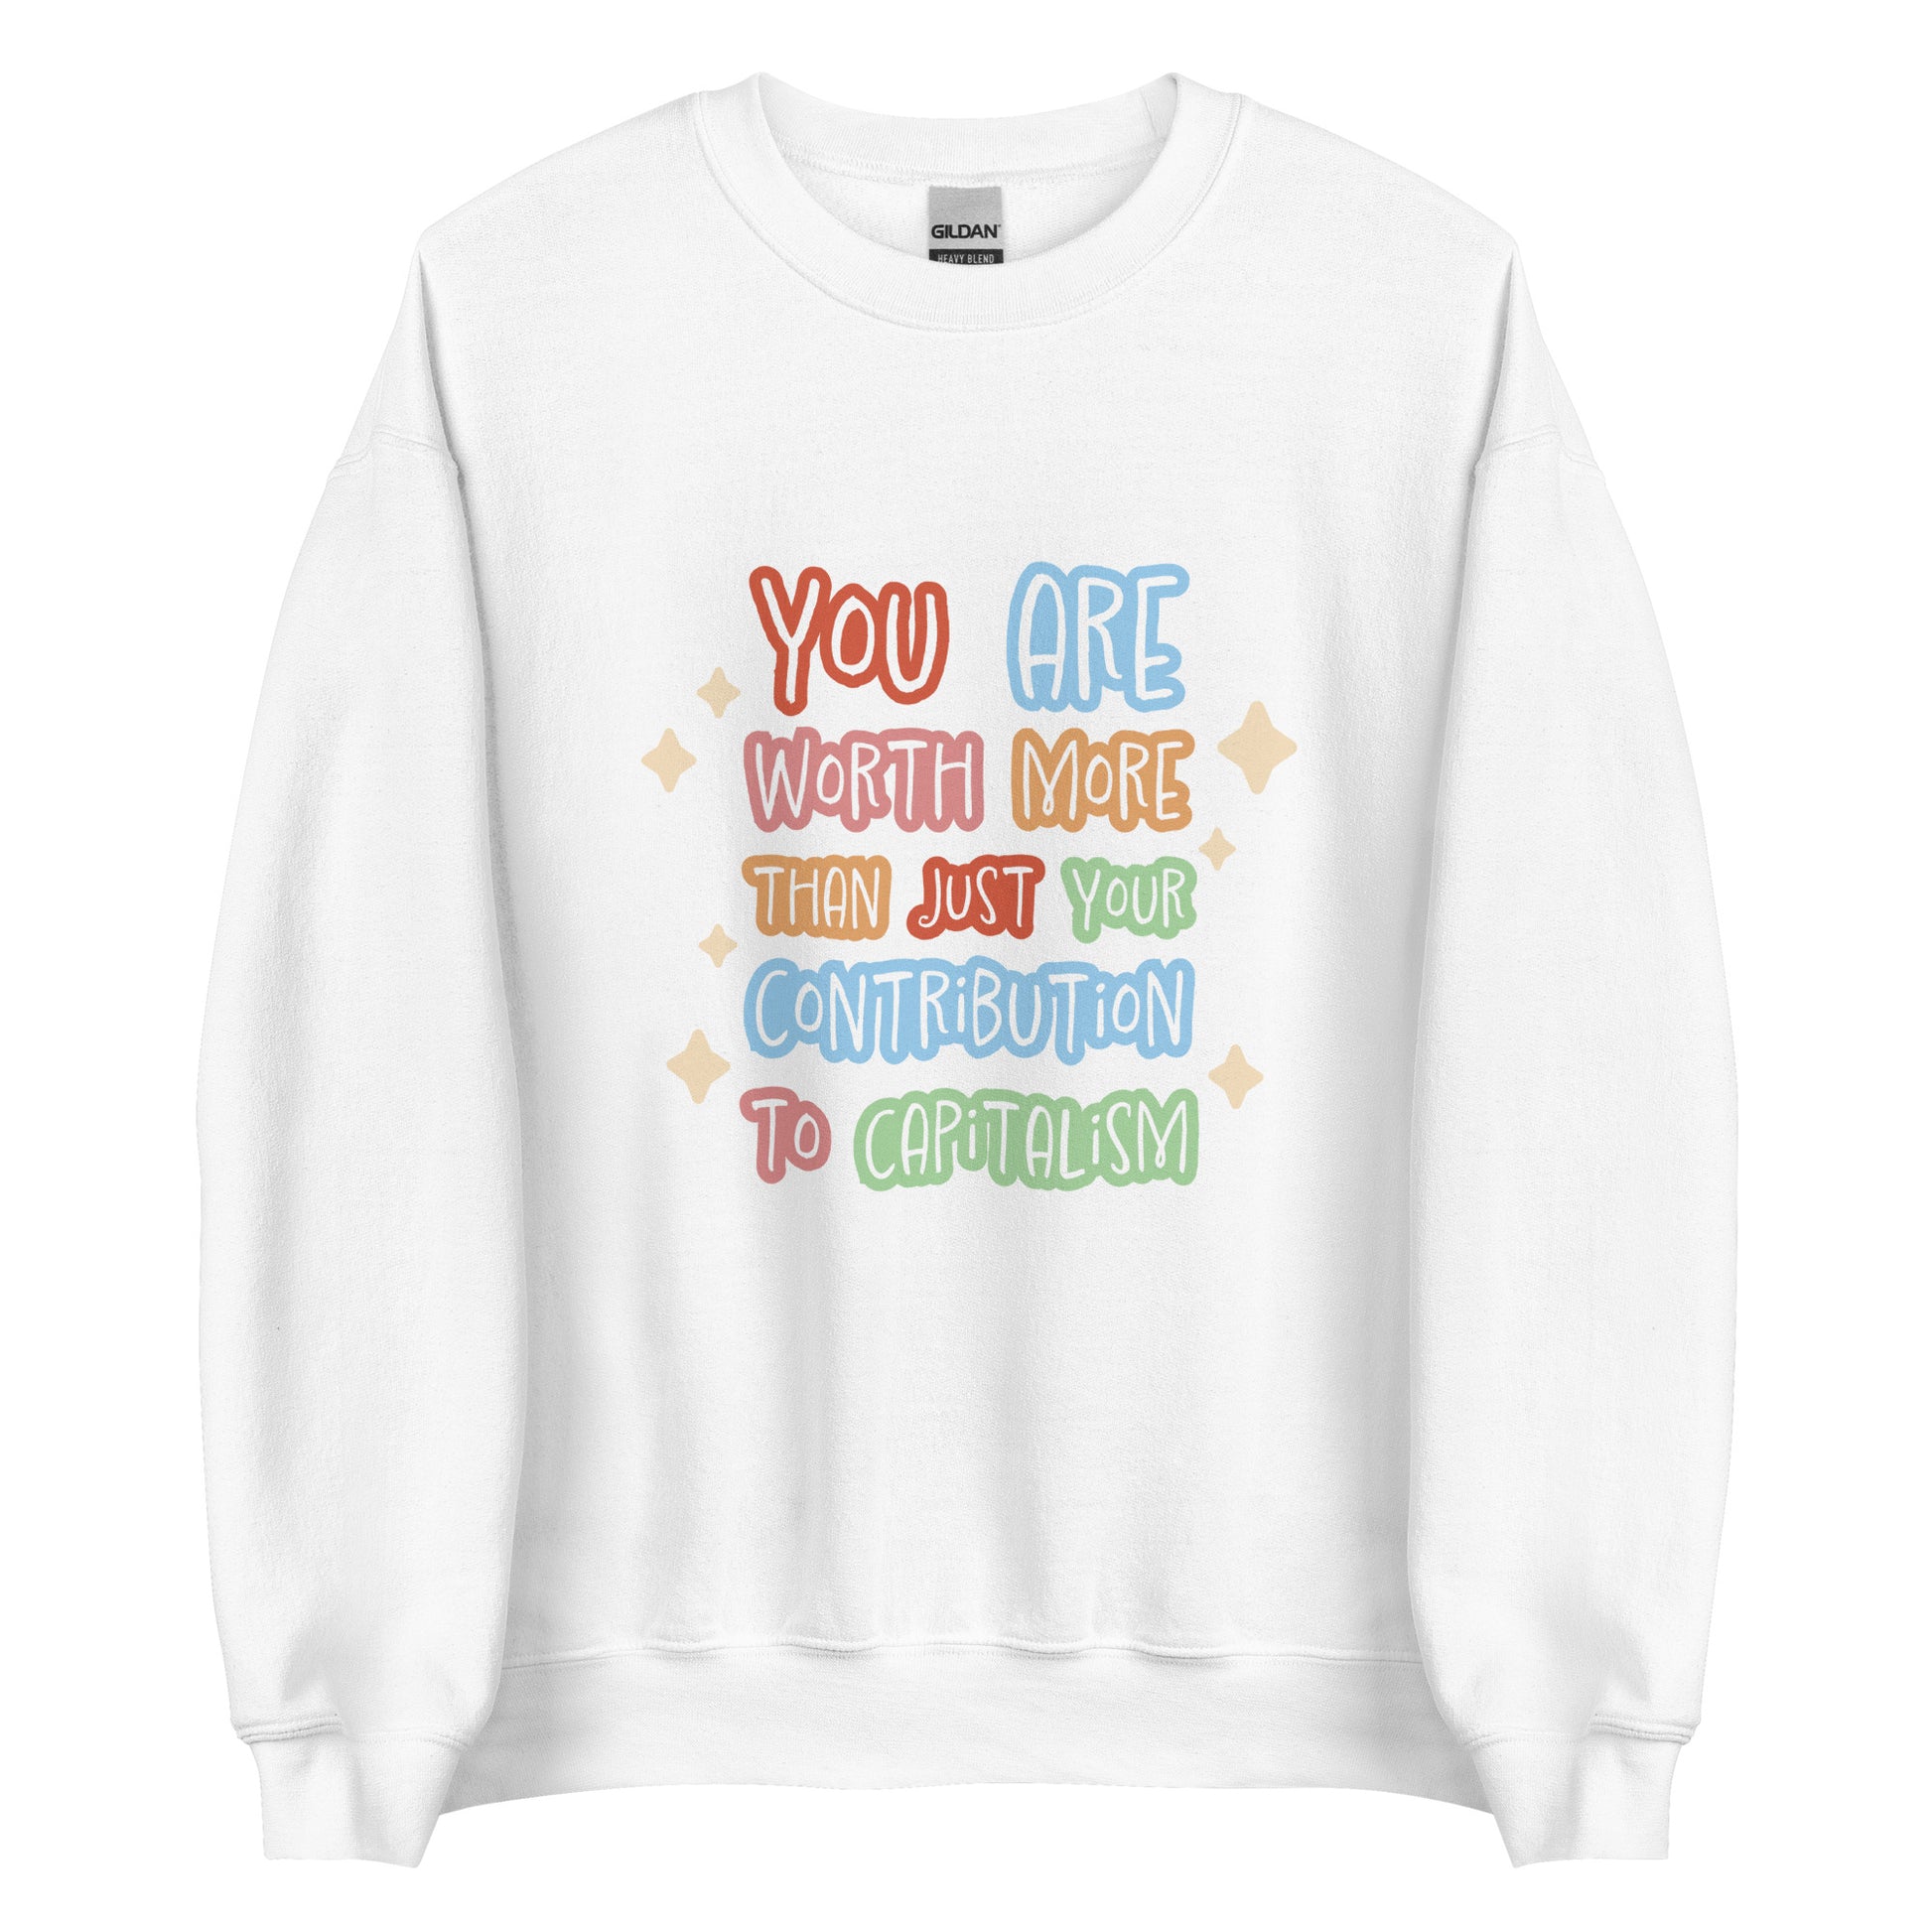 A white crewneck sweatshirt featuring colorful hand-written-style text that reads "You are worth more than just your contribution to capitalism". Sparkles surround the text on each side.